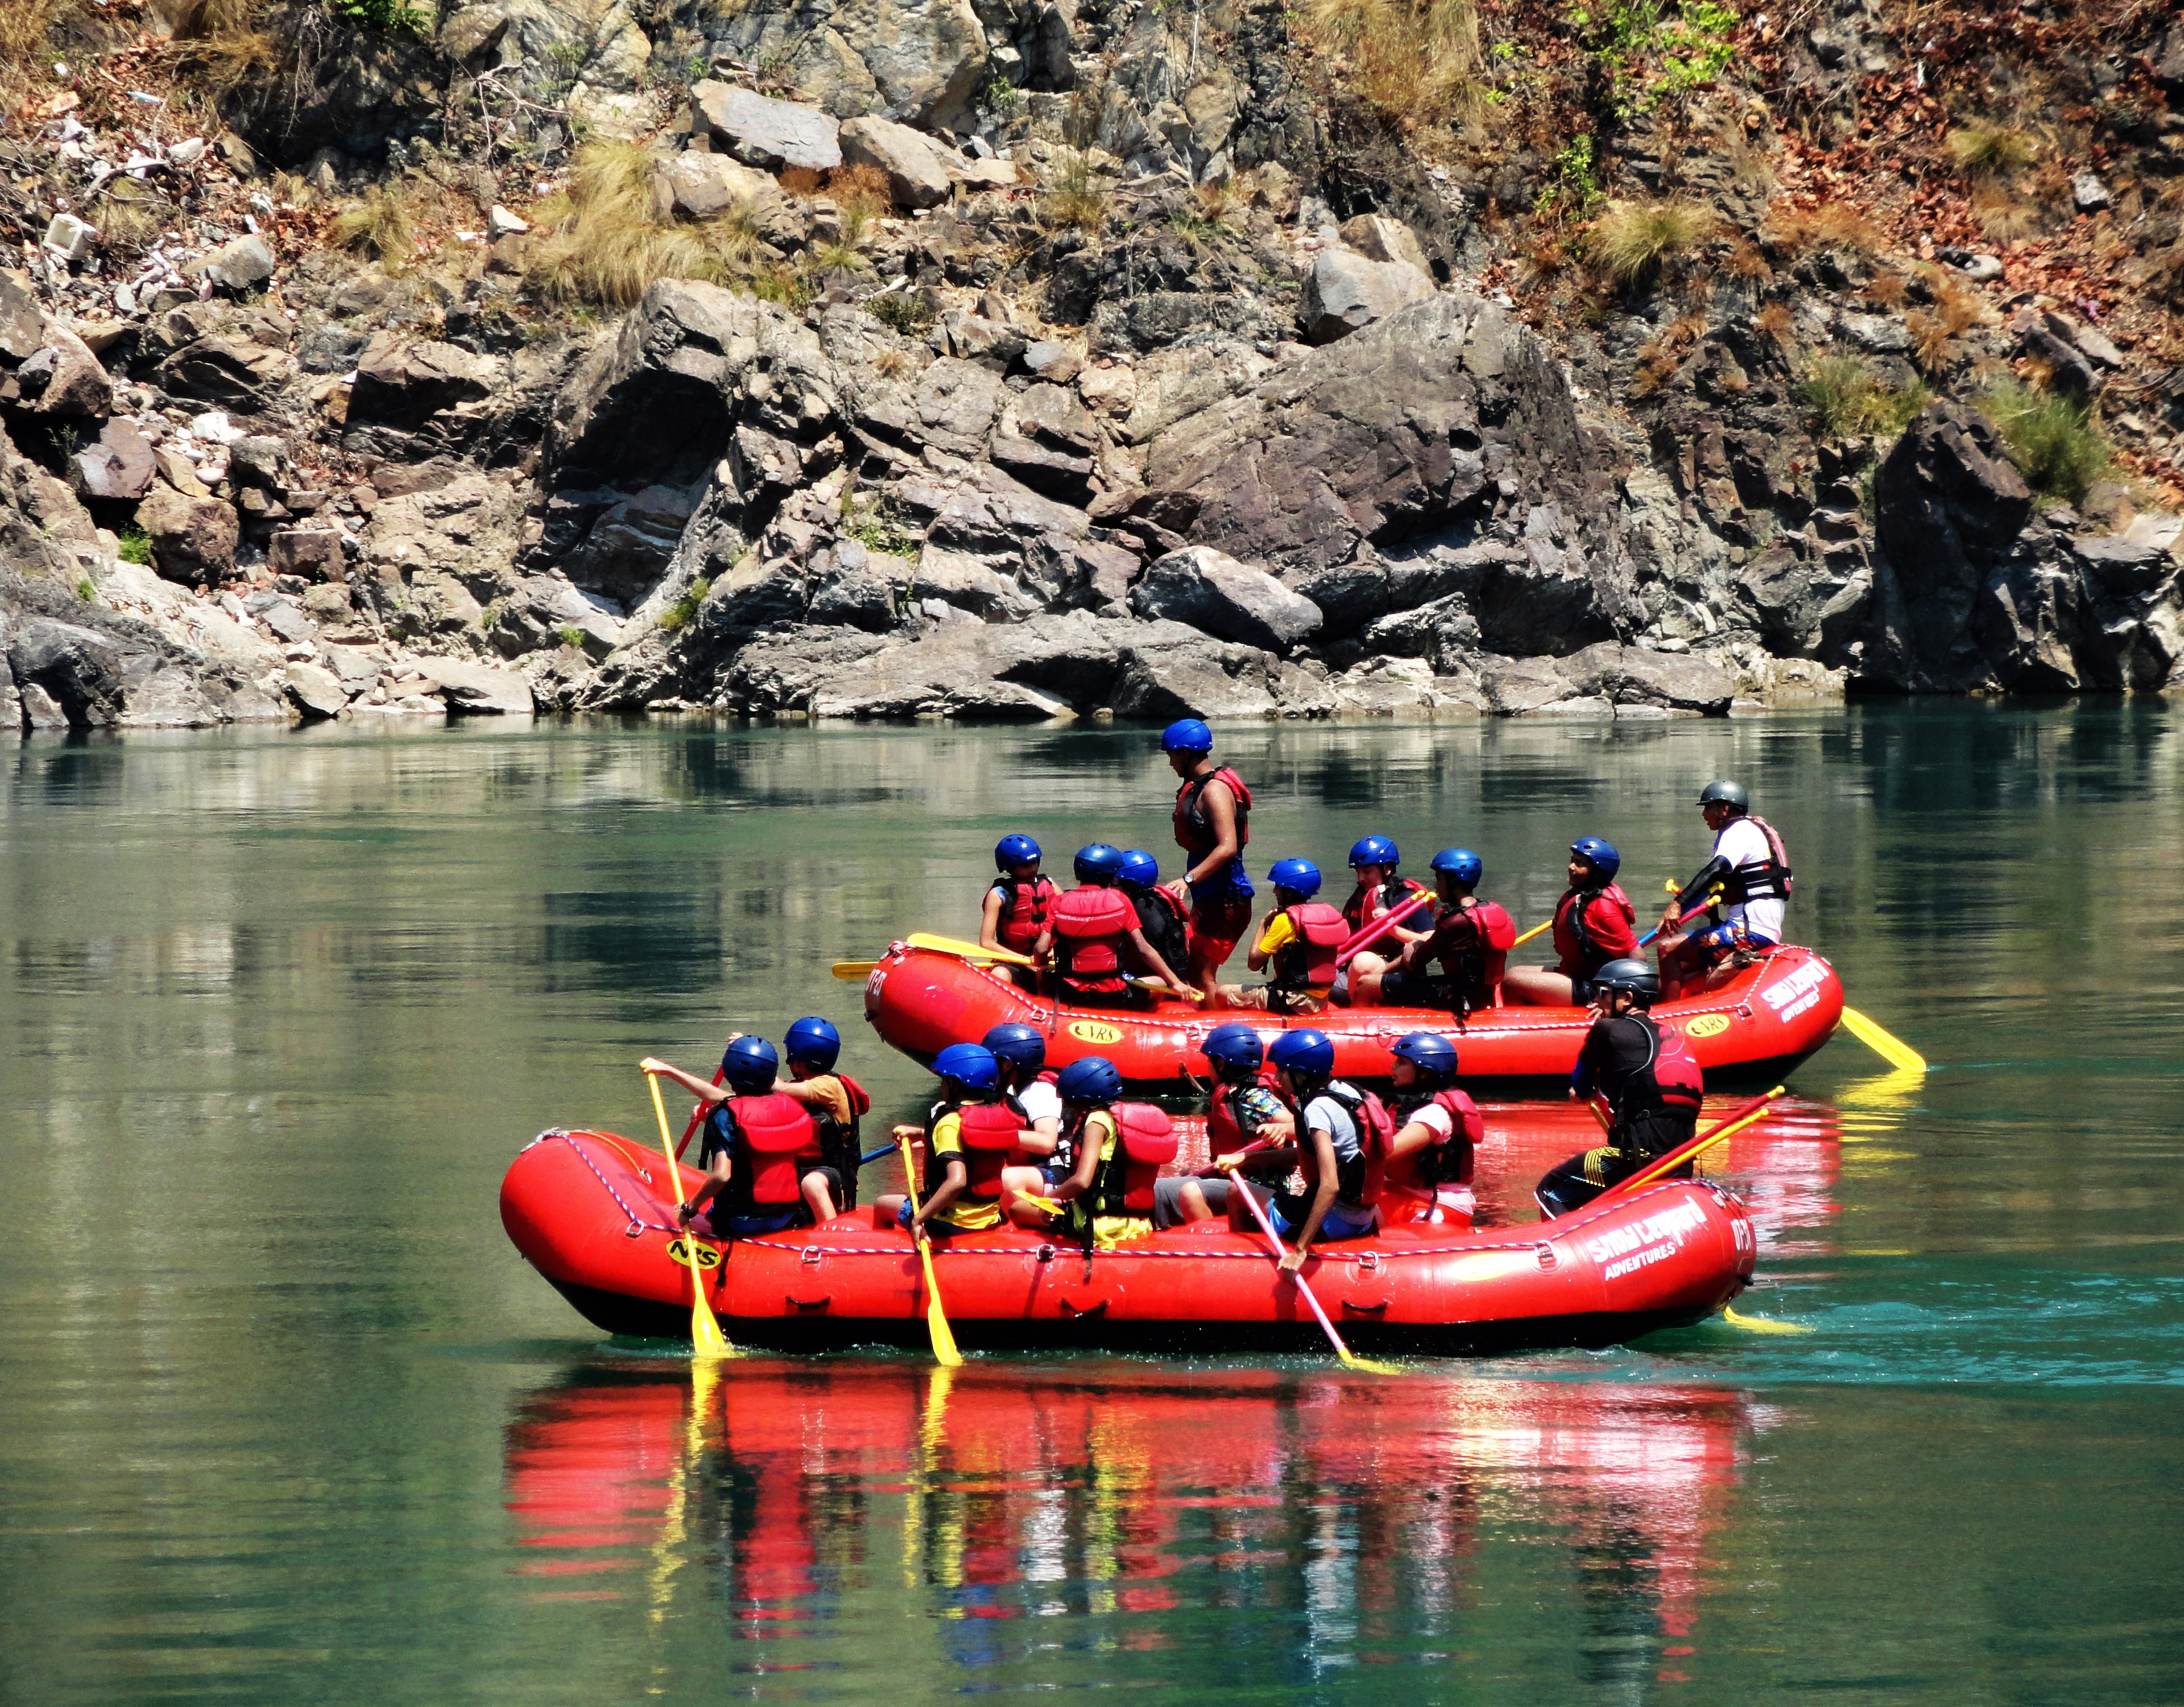 Kolad River Rafting - A Guide to Enjoying the Most Exciting Offbeat Adventure